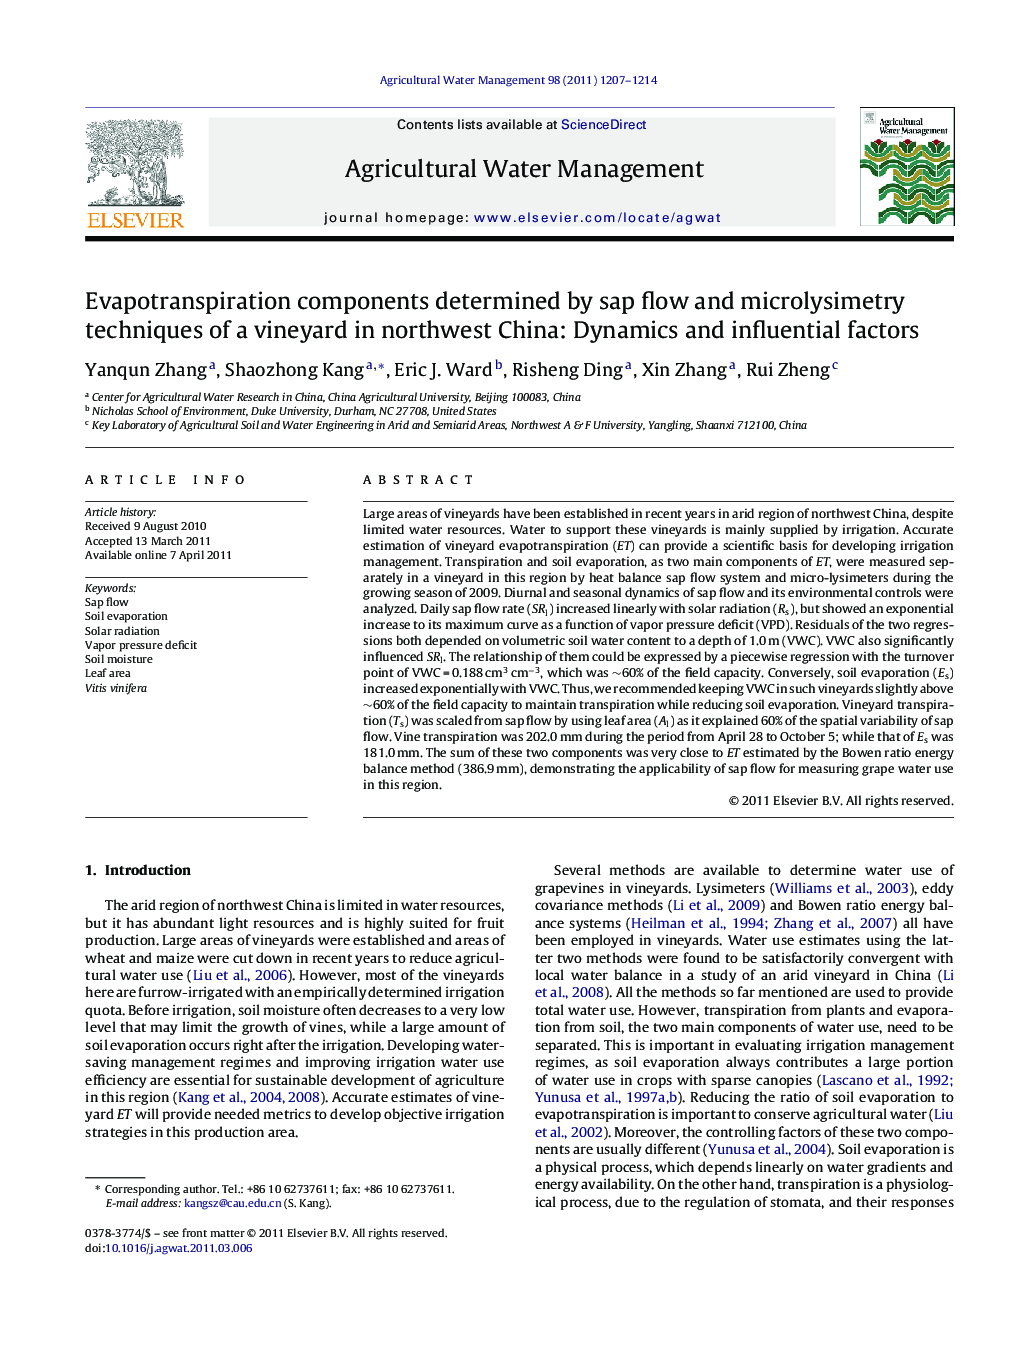 Evapotranspiration components determined by sap flow and microlysimetry techniques of a vineyard in northwest China: Dynamics and influential factors